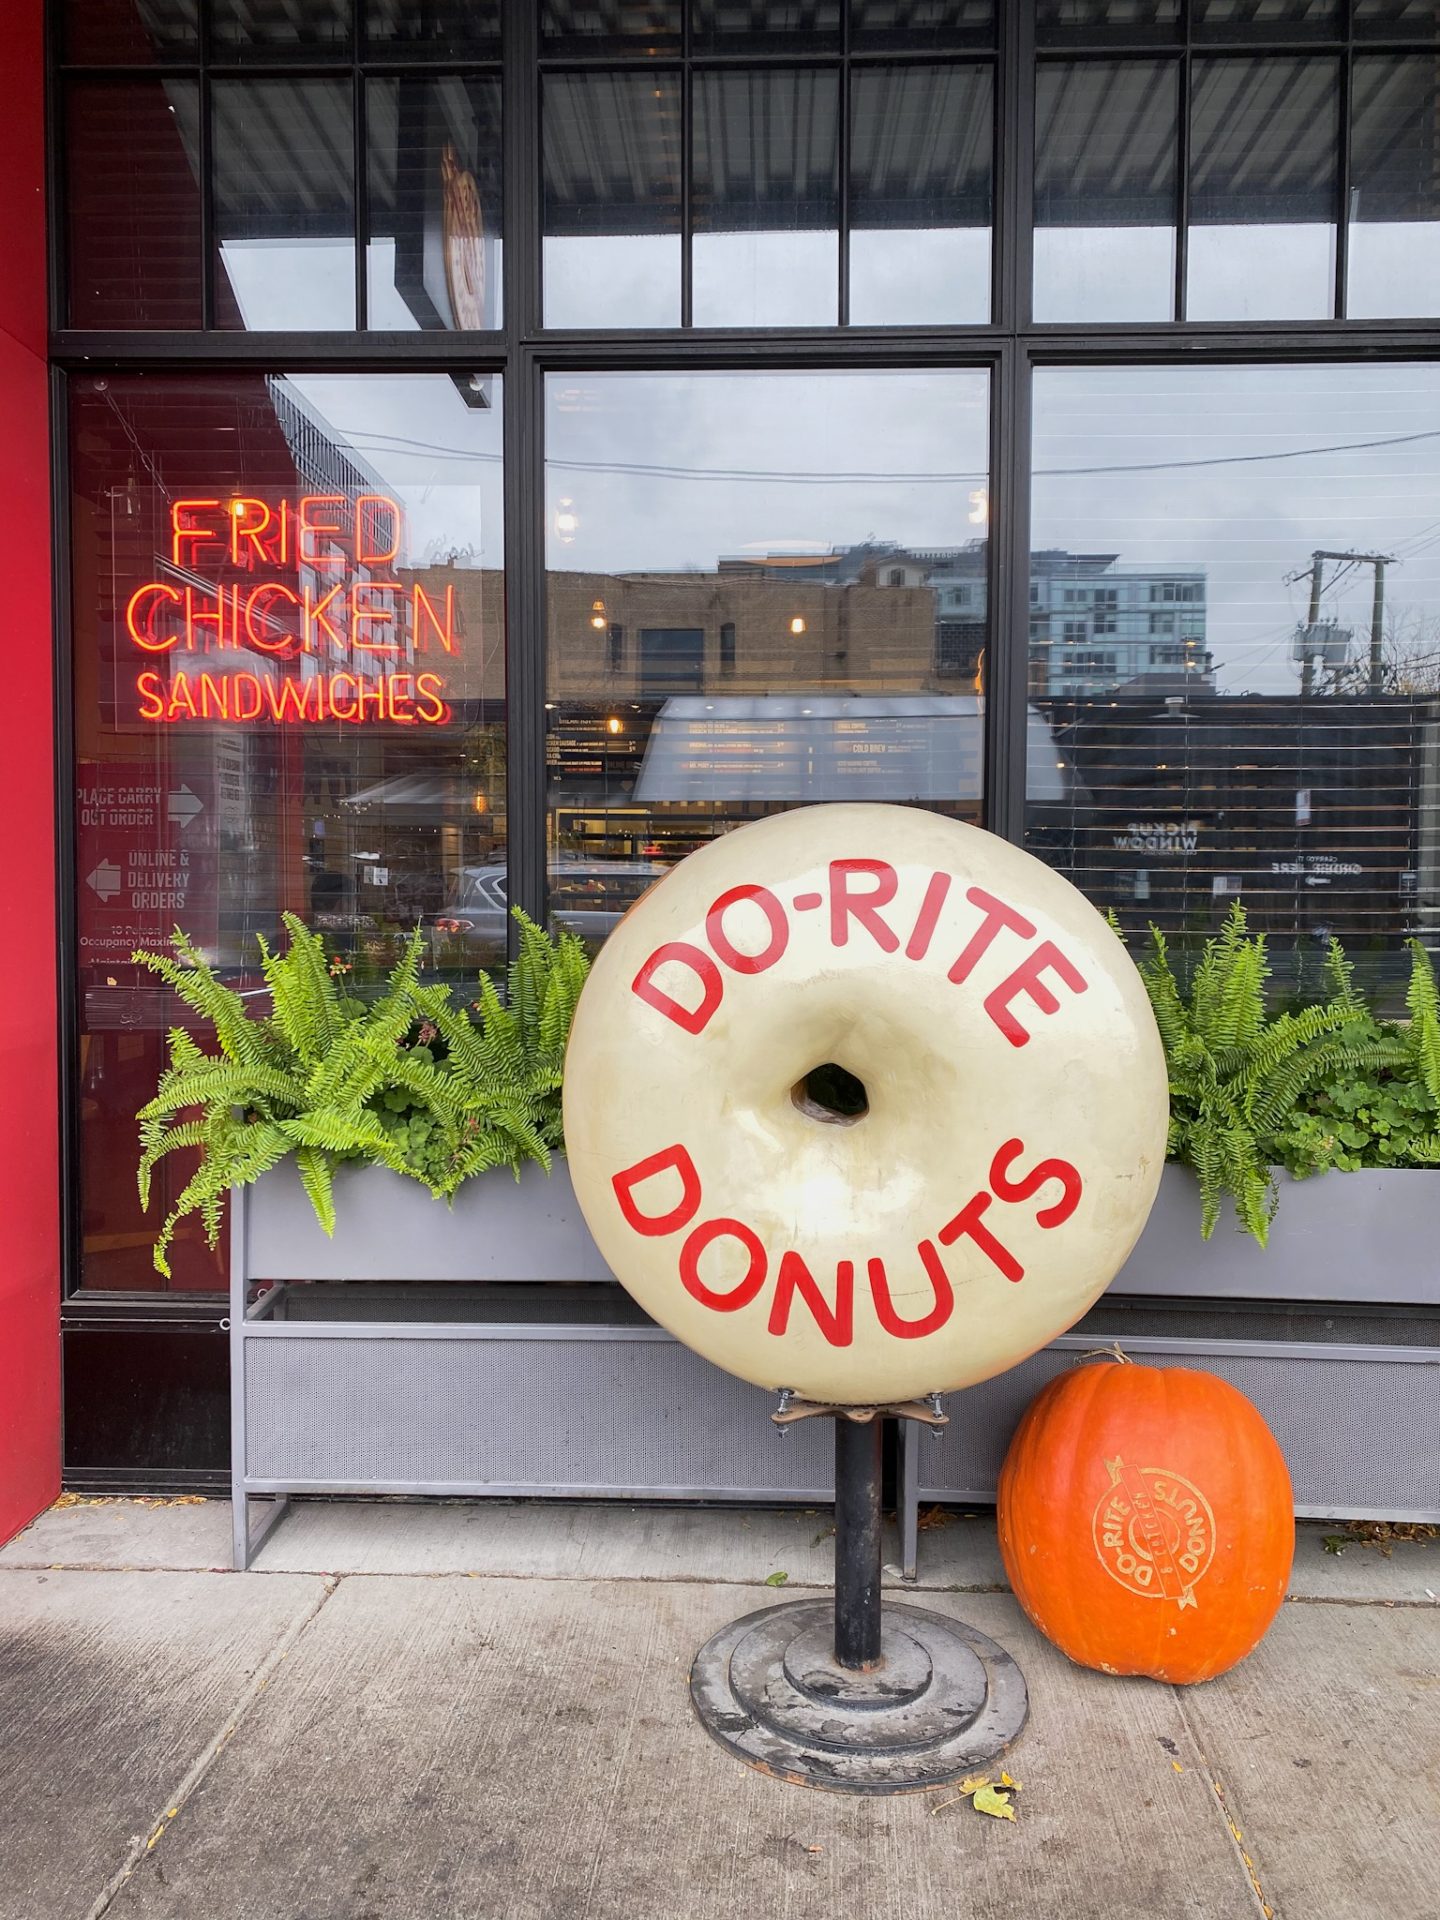 do-rite donuts chicago illinois downtown and west loop